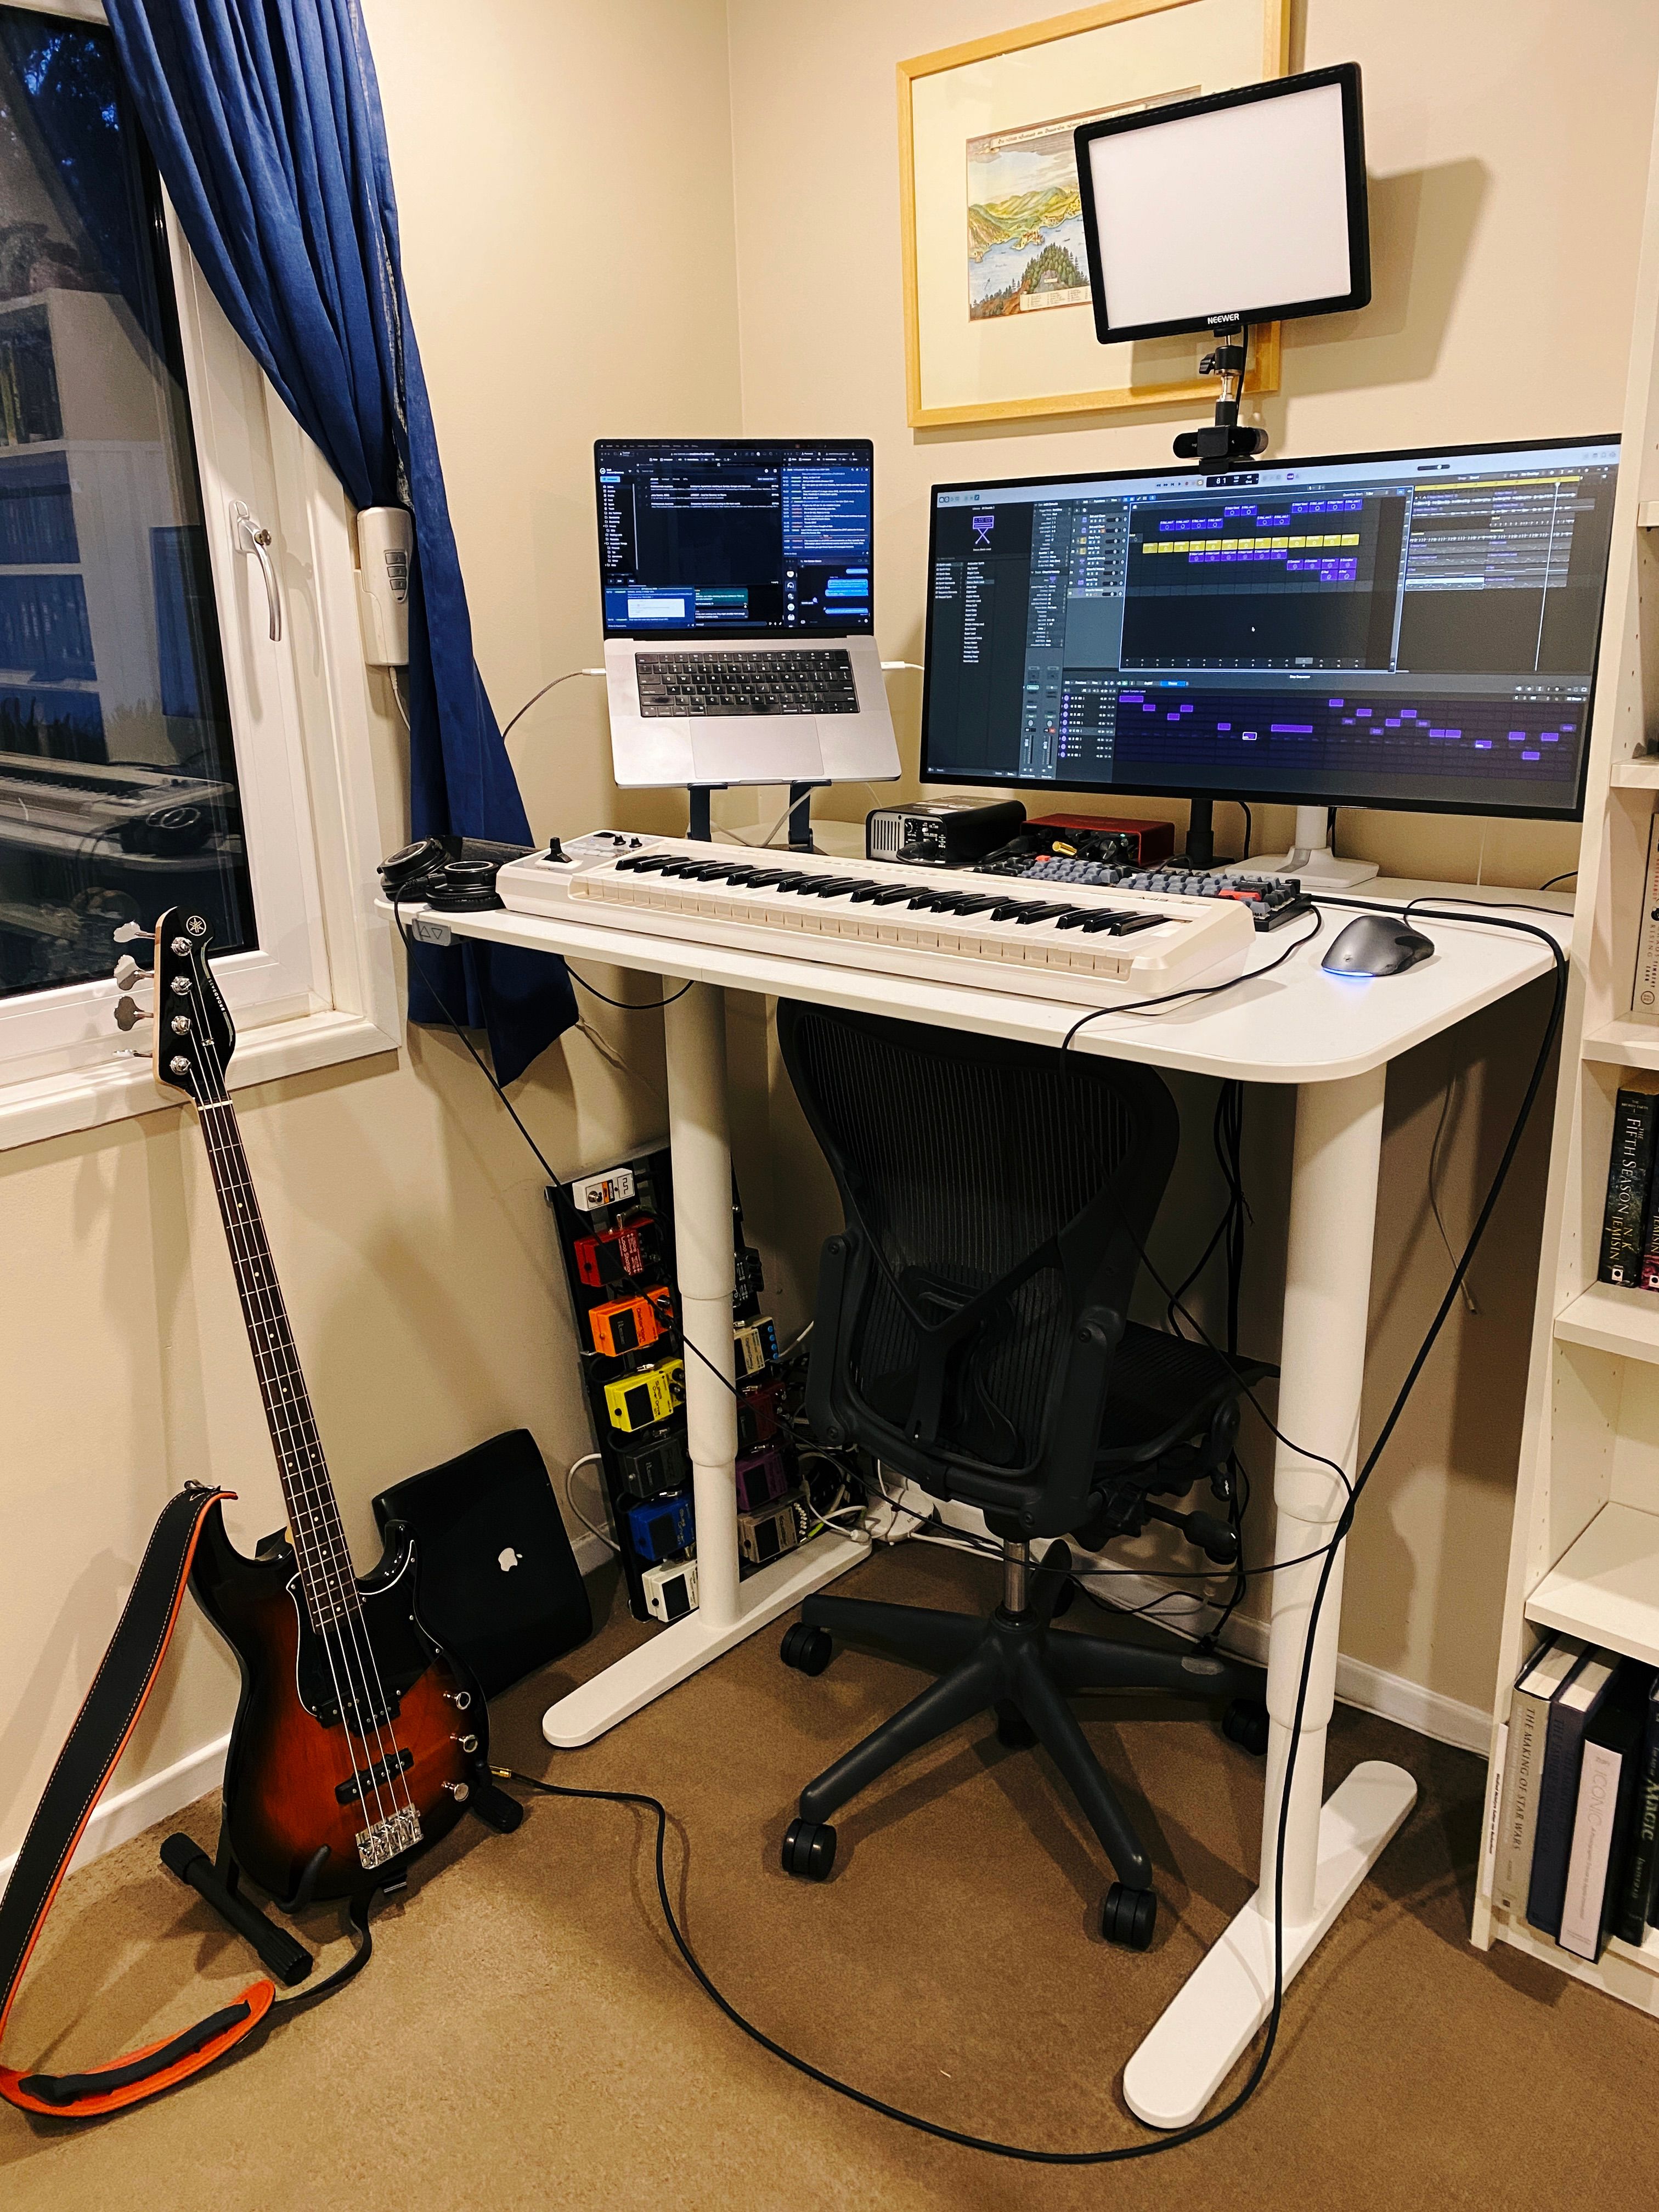 A photo of my standing desk in its upright position, with a bass guitar sitting to the left of the desk, a MIDI keyboard on the desk, and Logic Pro showing on the main display.